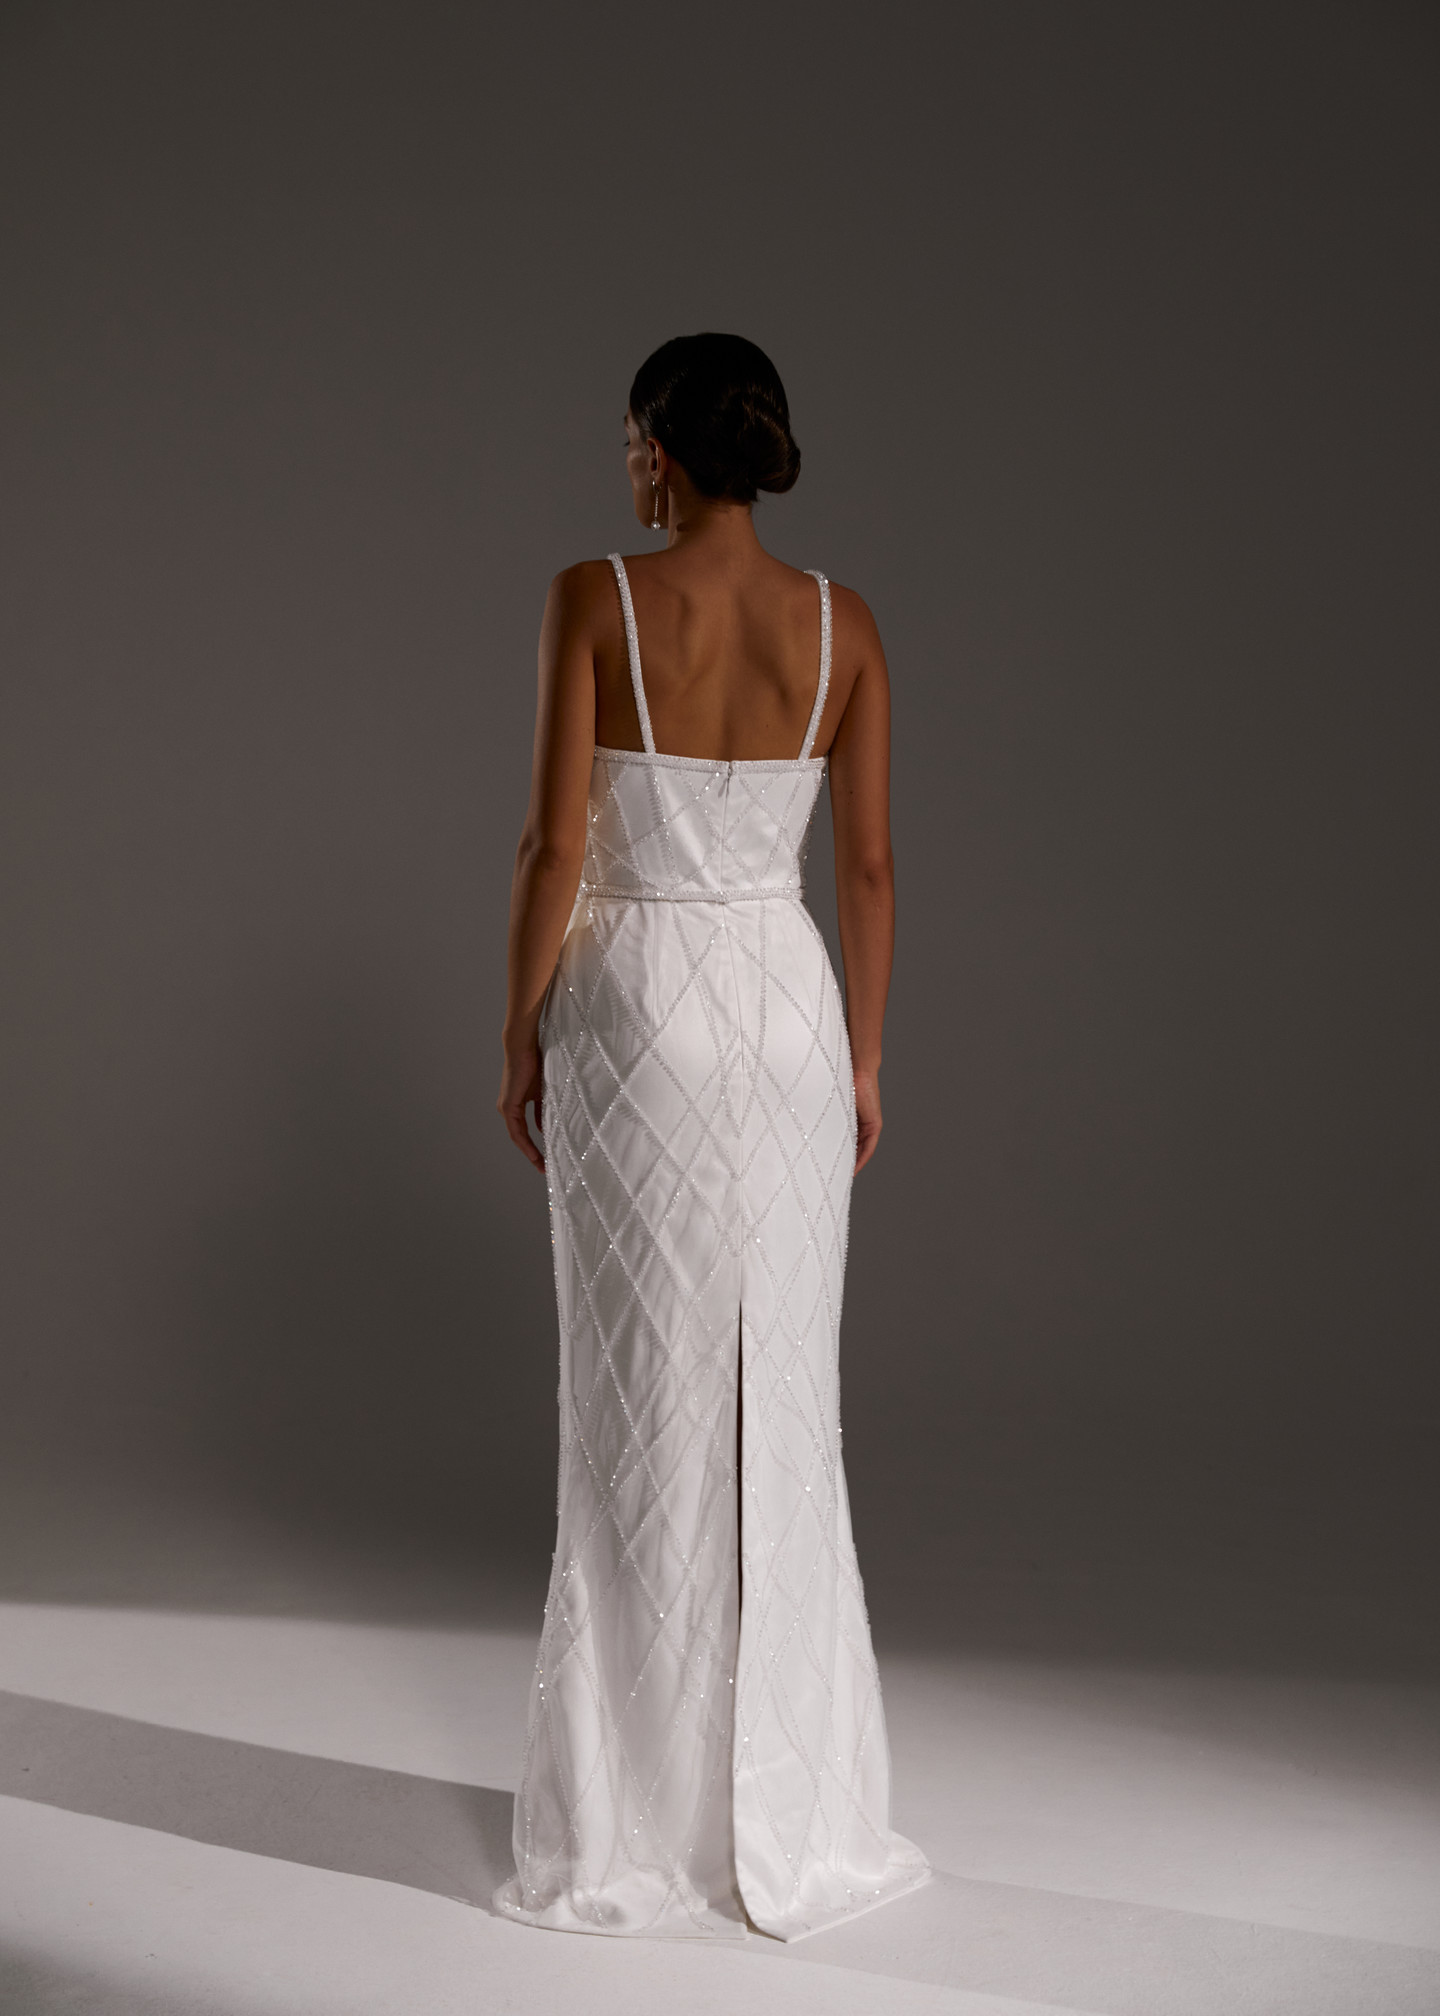 Carla dress, 2021, couture, dress, bridal, off-white, embroidery, sheath silhouette